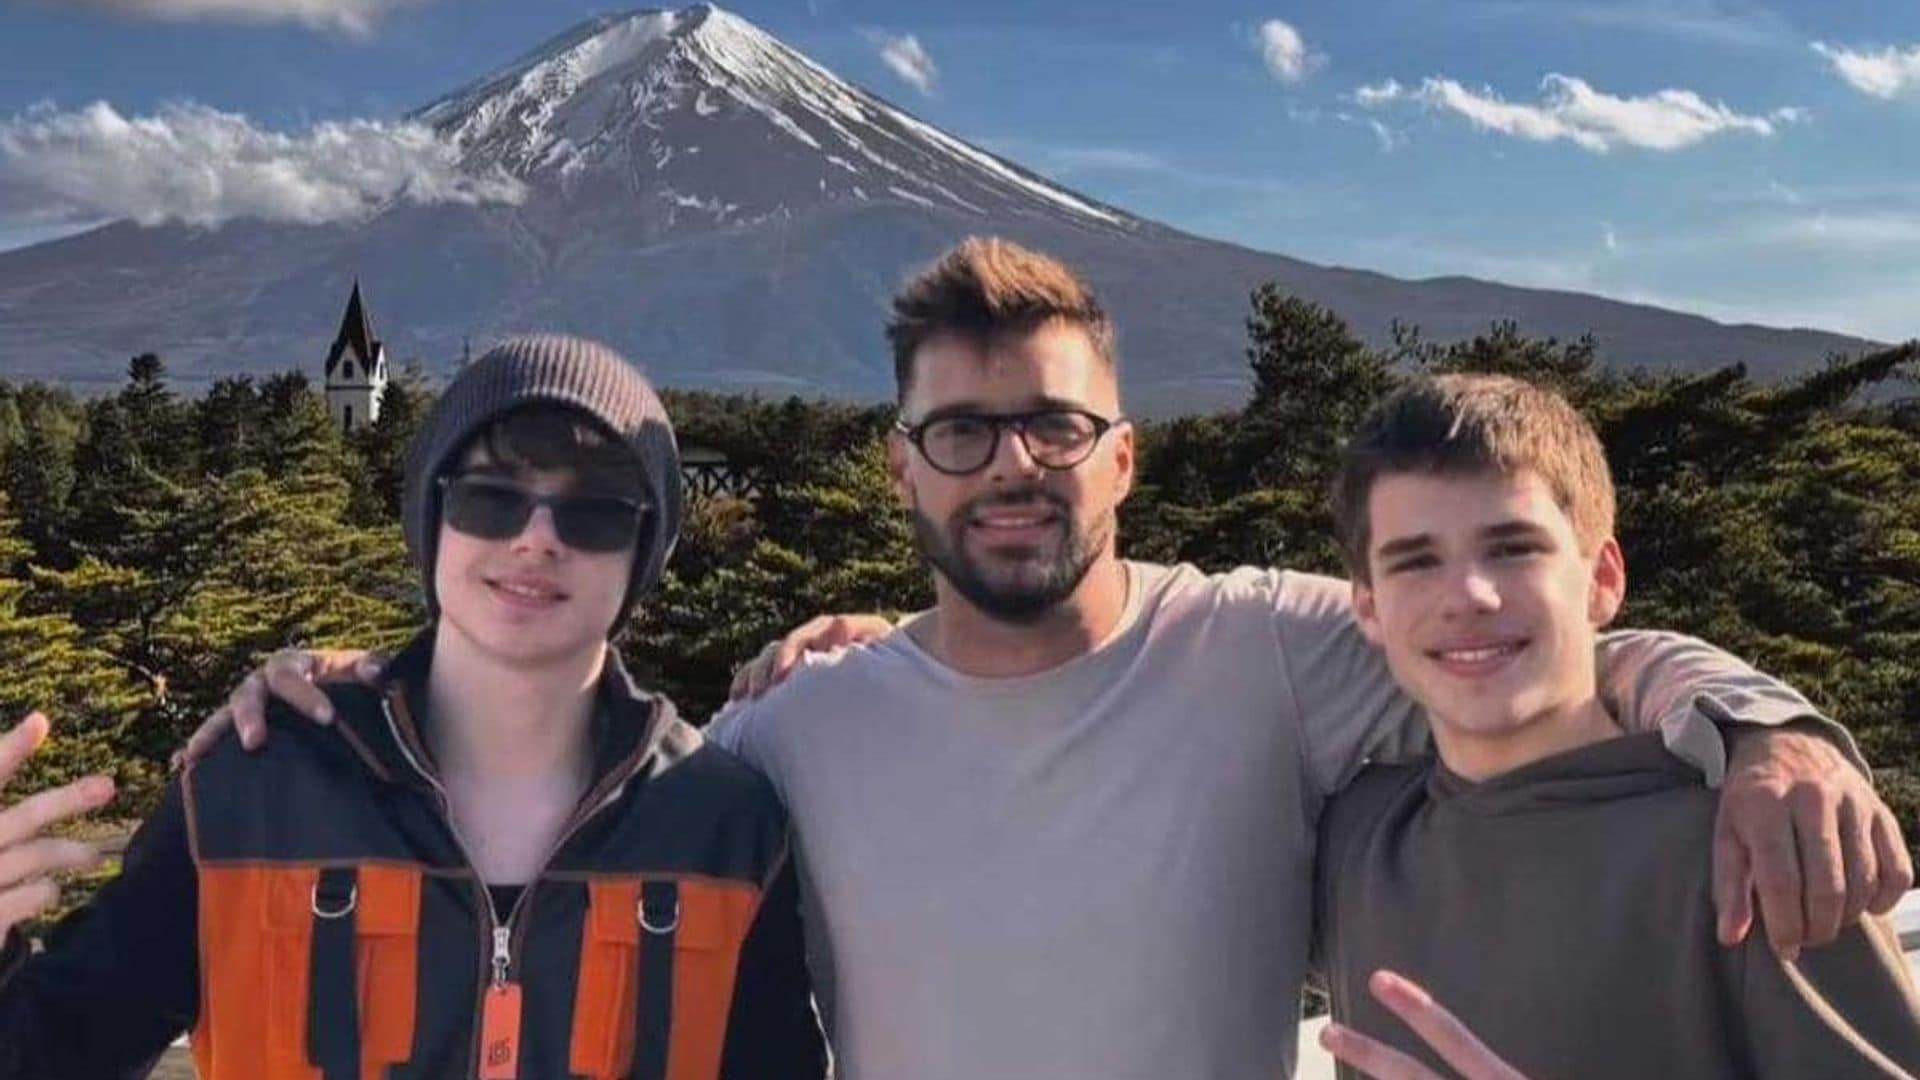 Ricky Martin and his sons share stunning photos from Mount Fuji